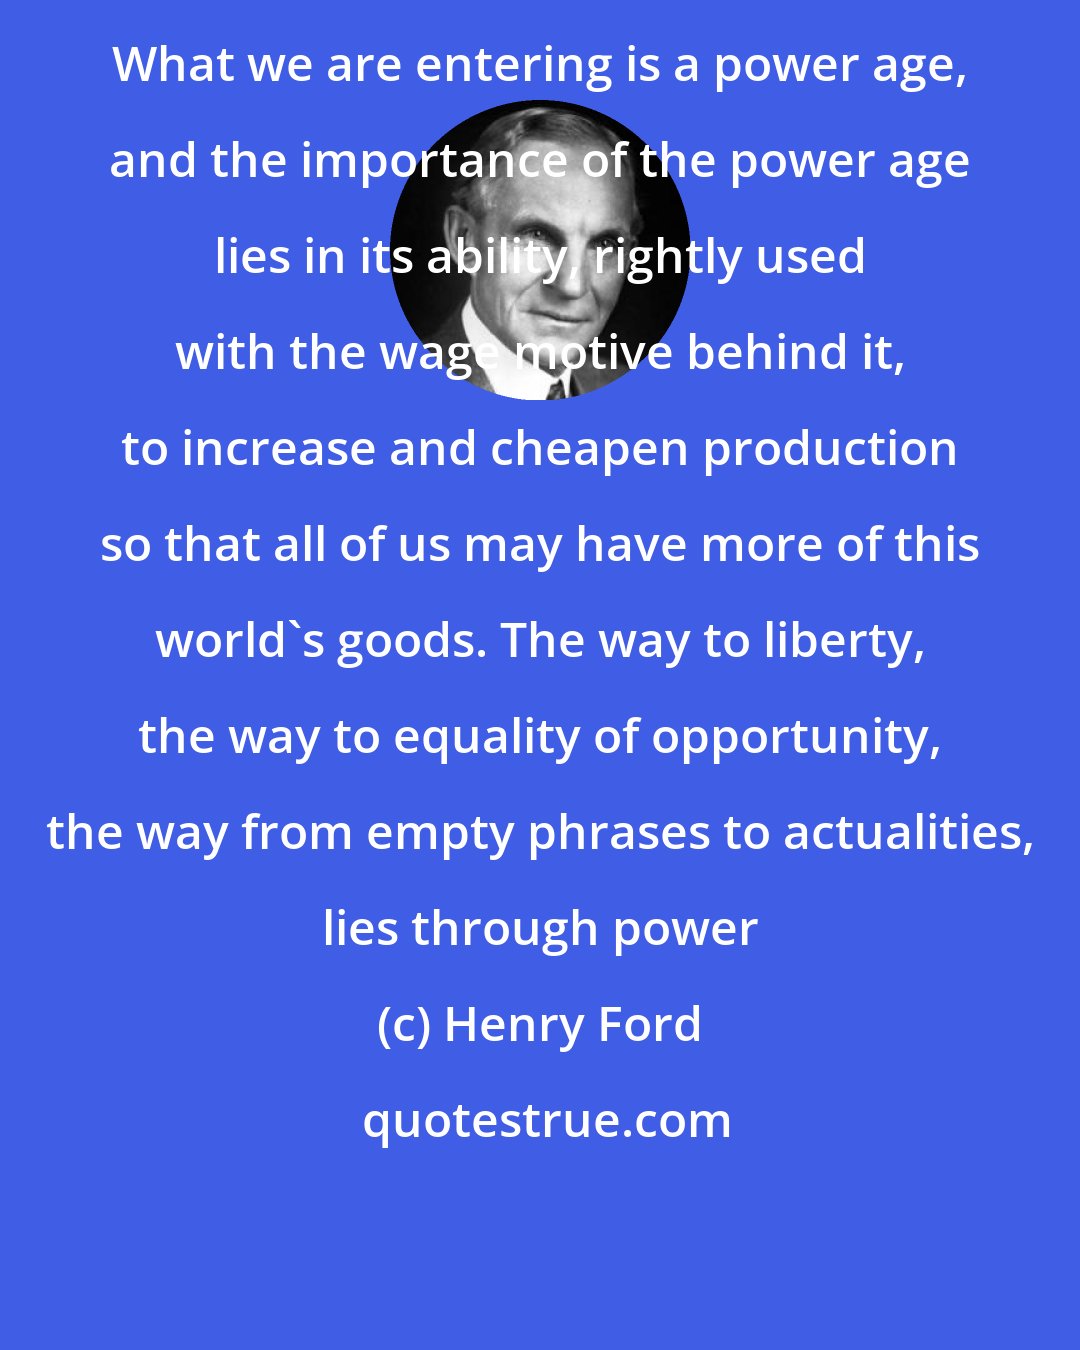 Henry Ford: What we are entering is a power age, and the importance of the power age lies in its ability, rightly used with the wage motive behind it, to increase and cheapen production so that all of us may have more of this world's goods. The way to liberty, the way to equality of opportunity, the way from empty phrases to actualities, lies through power